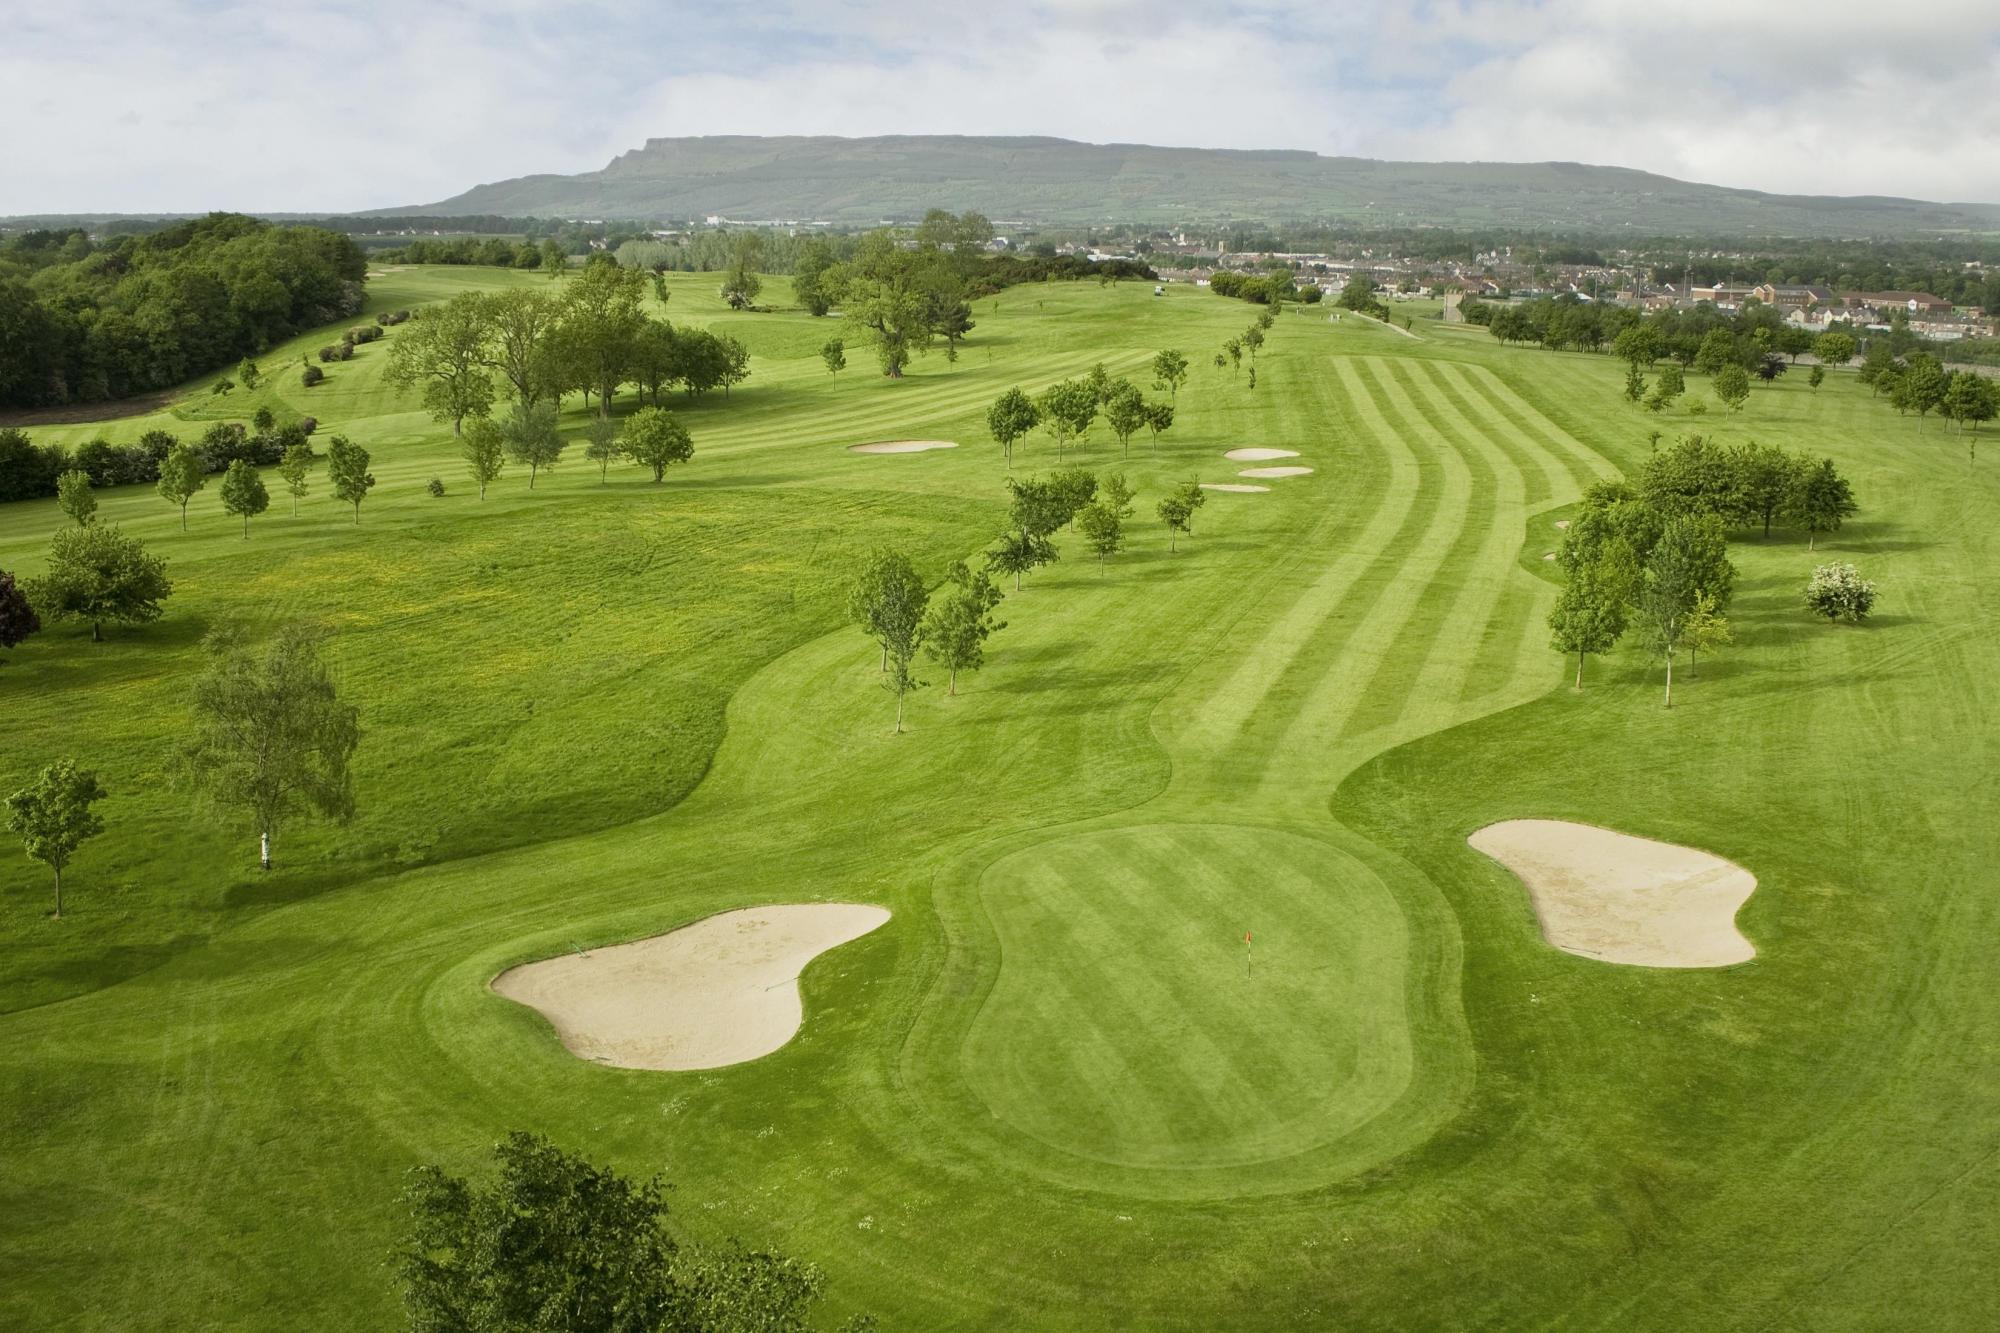 Roe Park Resort's impressive golf course situated in gorgeous Northern Ireland.